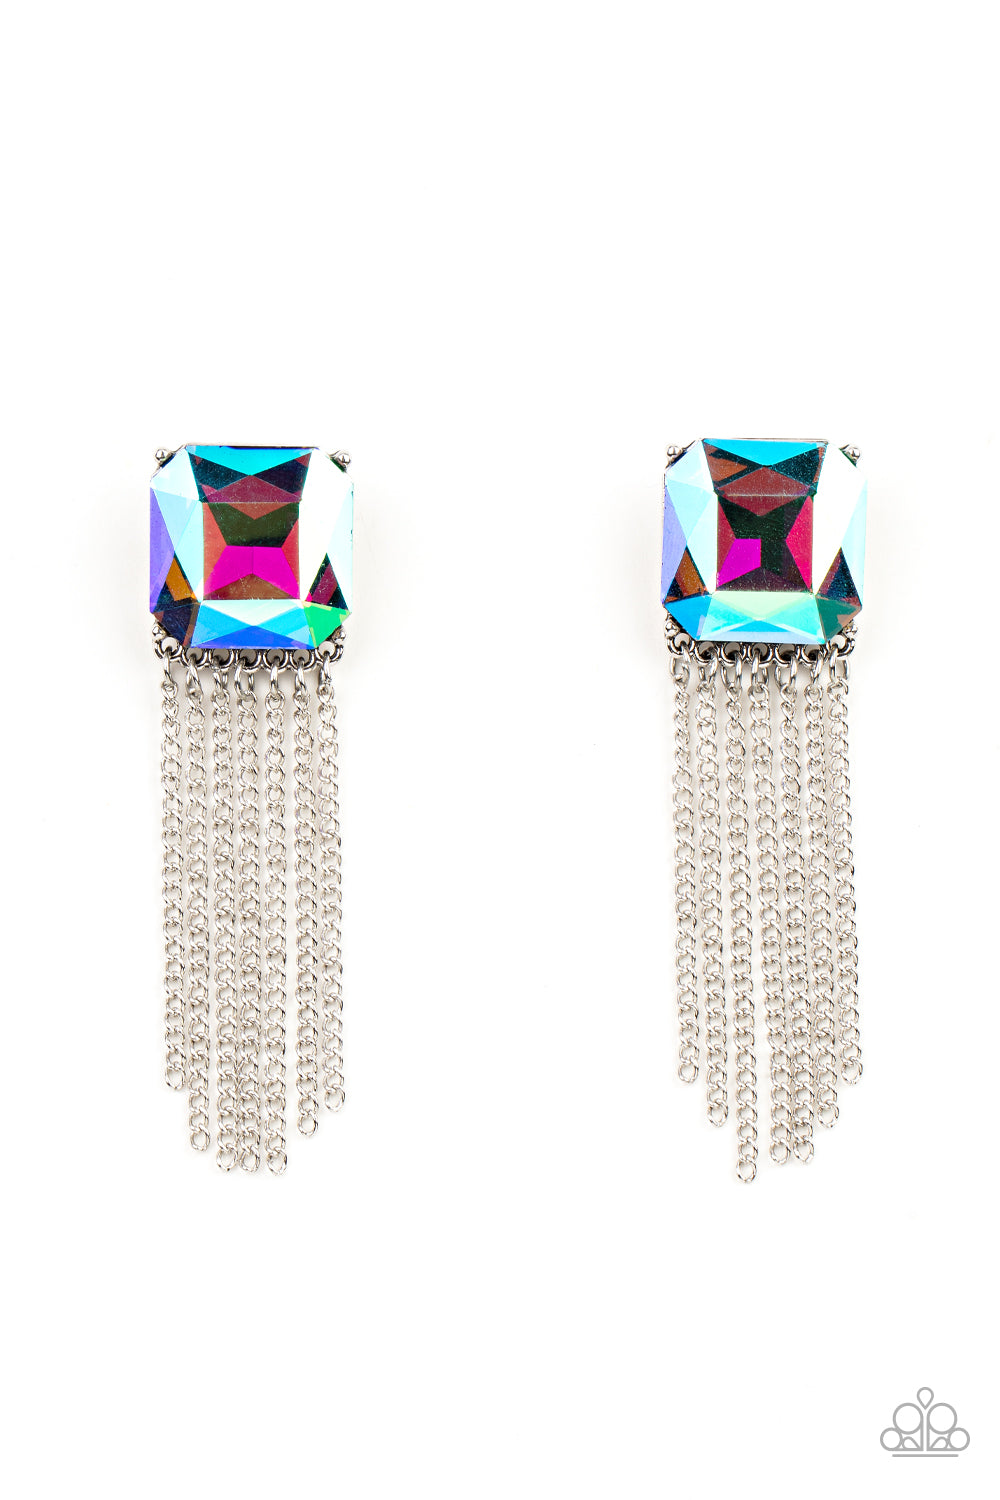 Supernova Novelty Multi Earring - Paparazzi Accessories  Featuring a stellar UV shimmer, an oversized radiant cut gem is pressed into a pronged silver fitting that gives way to a tapered curtain of silver chains for an out-of-this-world finish. Earring attaches to a standard post fitting.  All Paparazzi Accessories are lead free and nickel free!  Sold as one pair of post earrings.